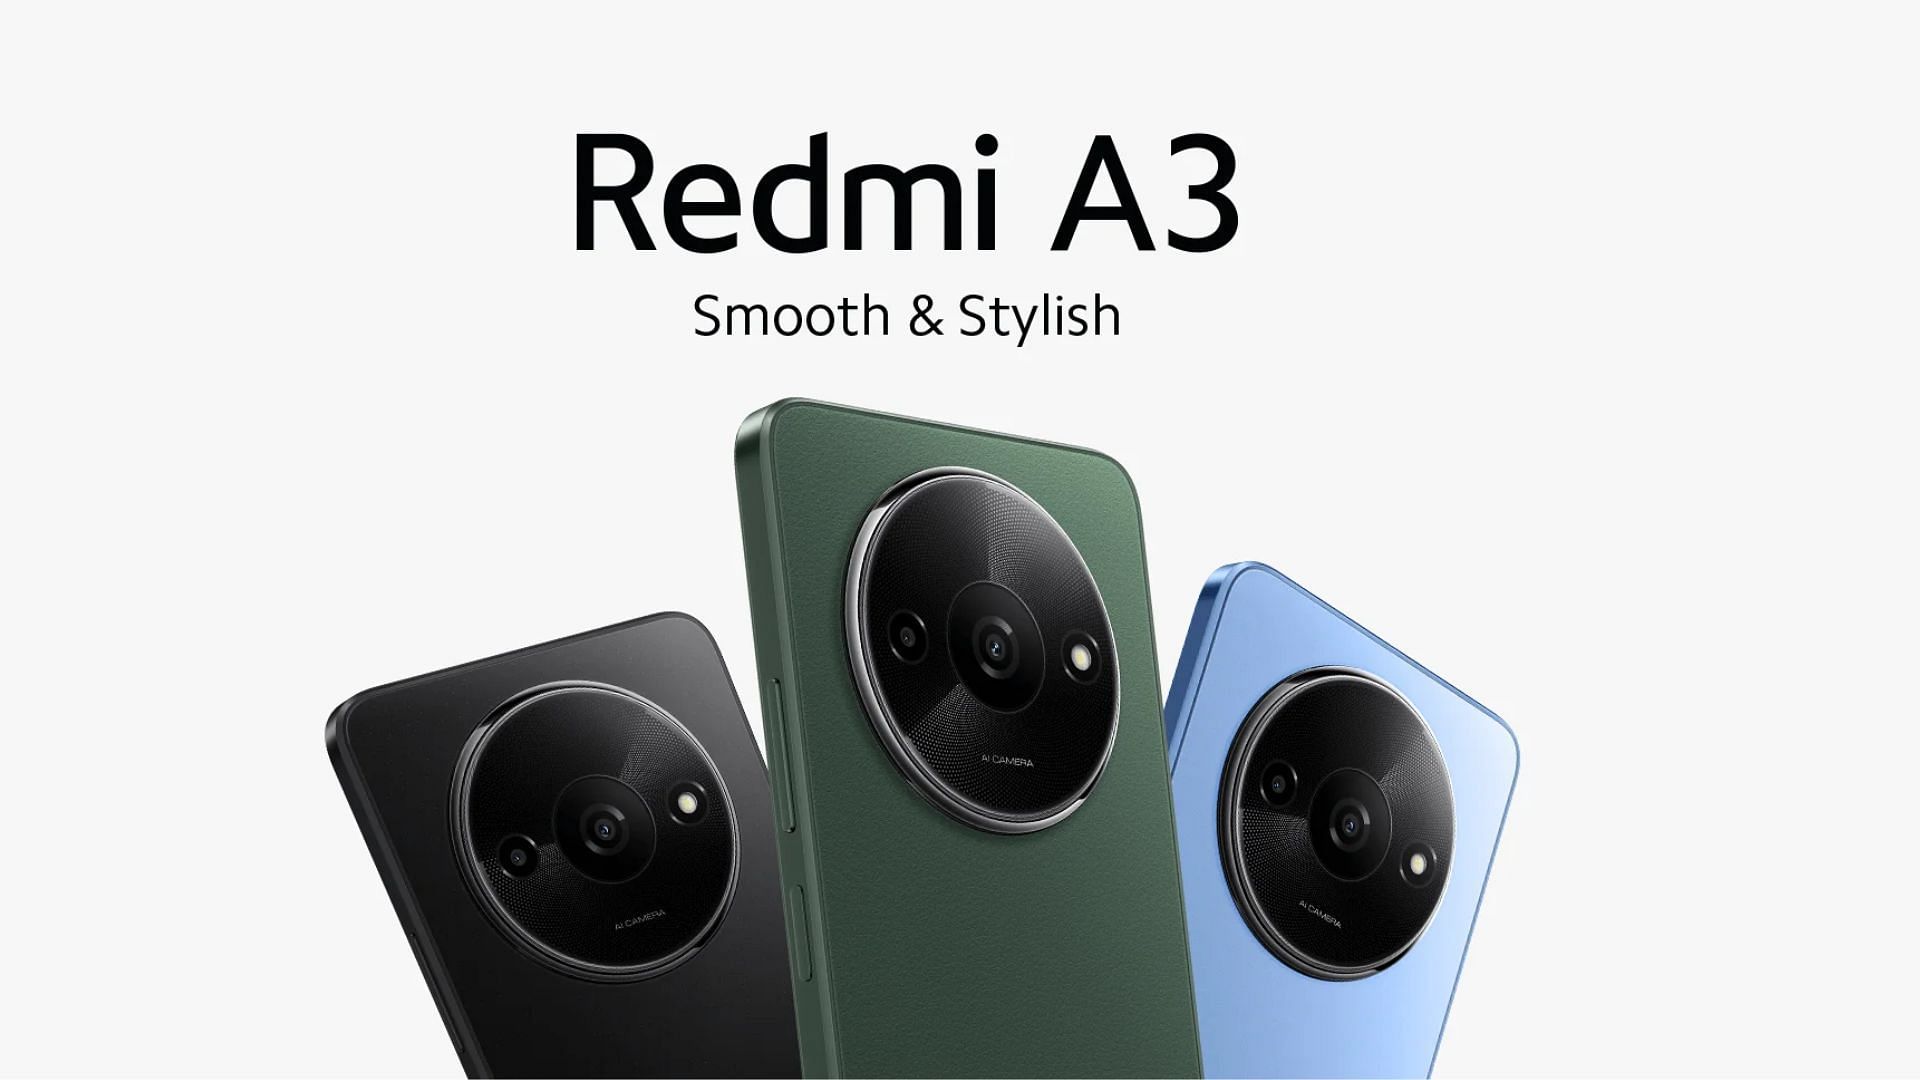 At around 80 dollars, this Redmi phone ticks all the basic boxes for an everyday device. (Image via Redmi)